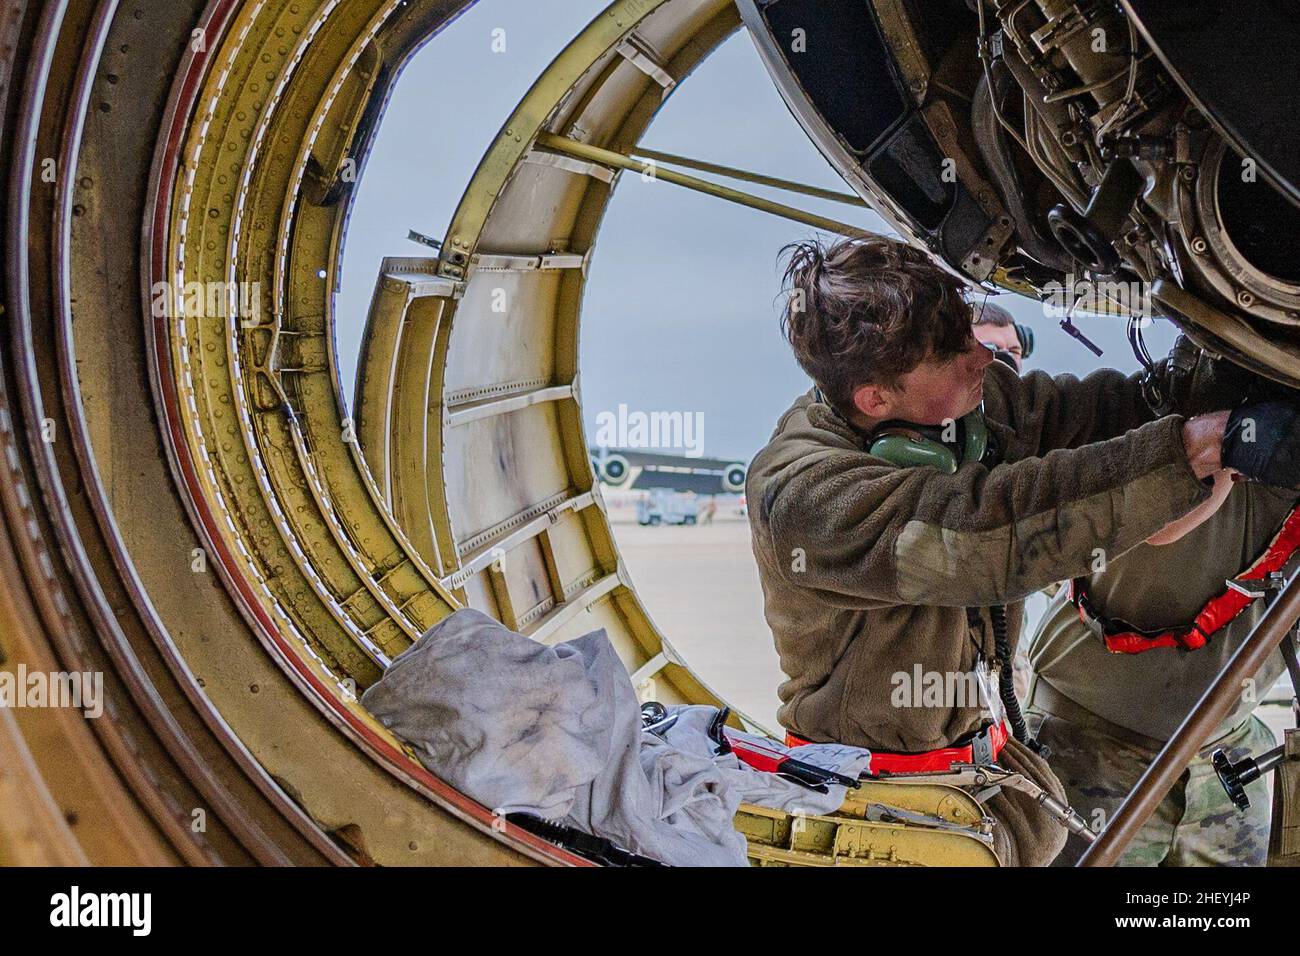 Barksdale Air Force Base, Louisiana, USA. 14th Dec, 2021. Airman 1st Class Brandon Sepulveda, 2nd Maintenance Group aerospace propulsion technician, performs maintenance on a B-52H Stratofortress at Barksdale Air Force Base, Louisiana, Dec. 14, 2021. Aerospace propulsion specialists are critical in keeping Barksdale's B-52s mission ready. (photo by William Pugh) Credit: U.S. Air Force/ZUMA Press Wire Service/ZUMAPRESS.com/Alamy Live News Stock Photo